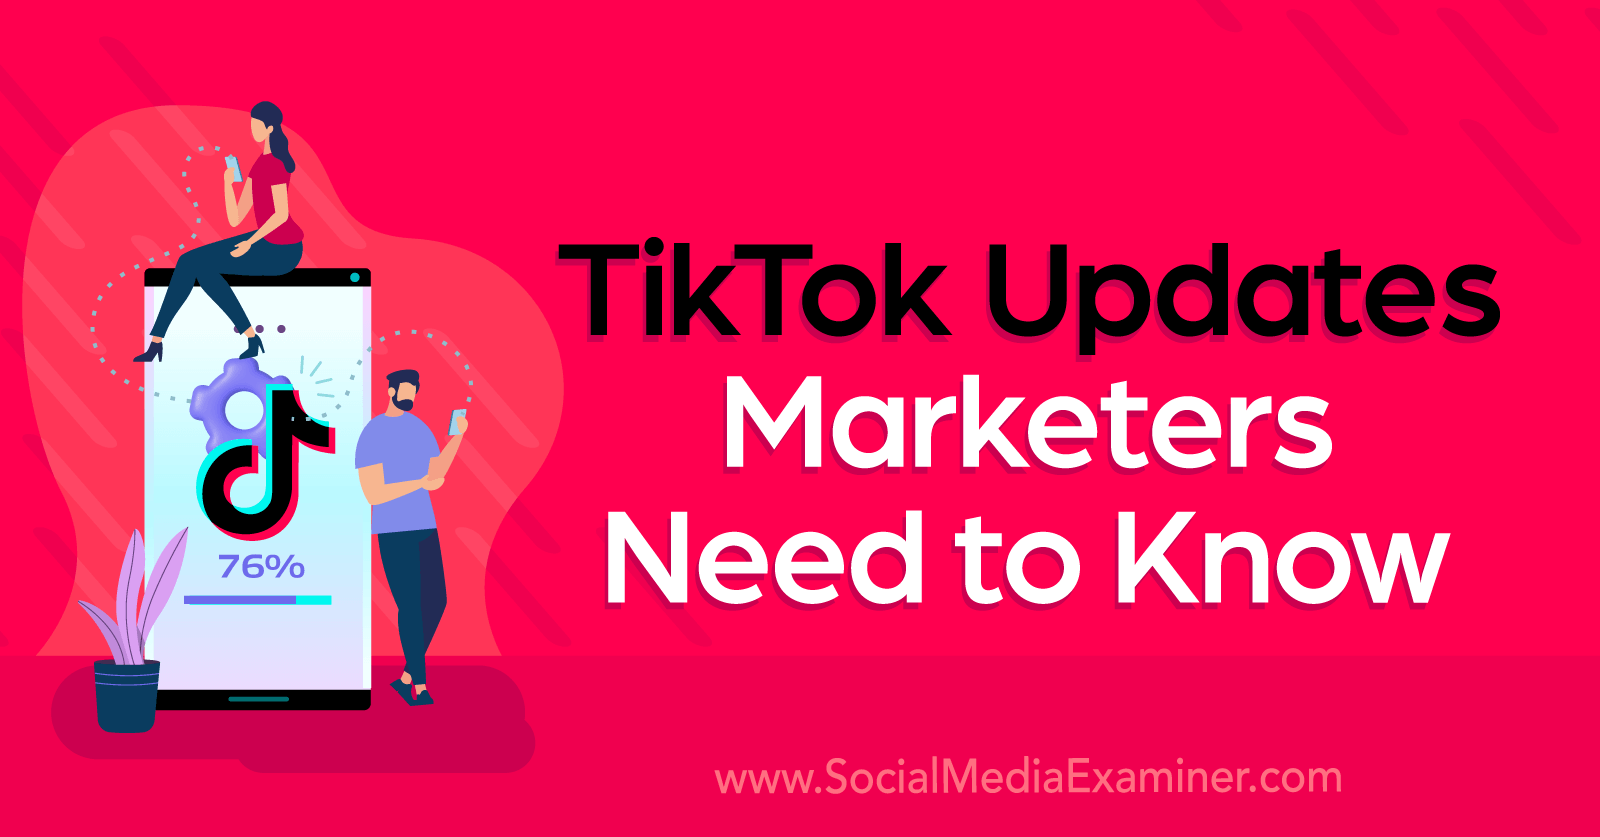 TikTok Updates Marketers Need to Know by Social Media Examiner